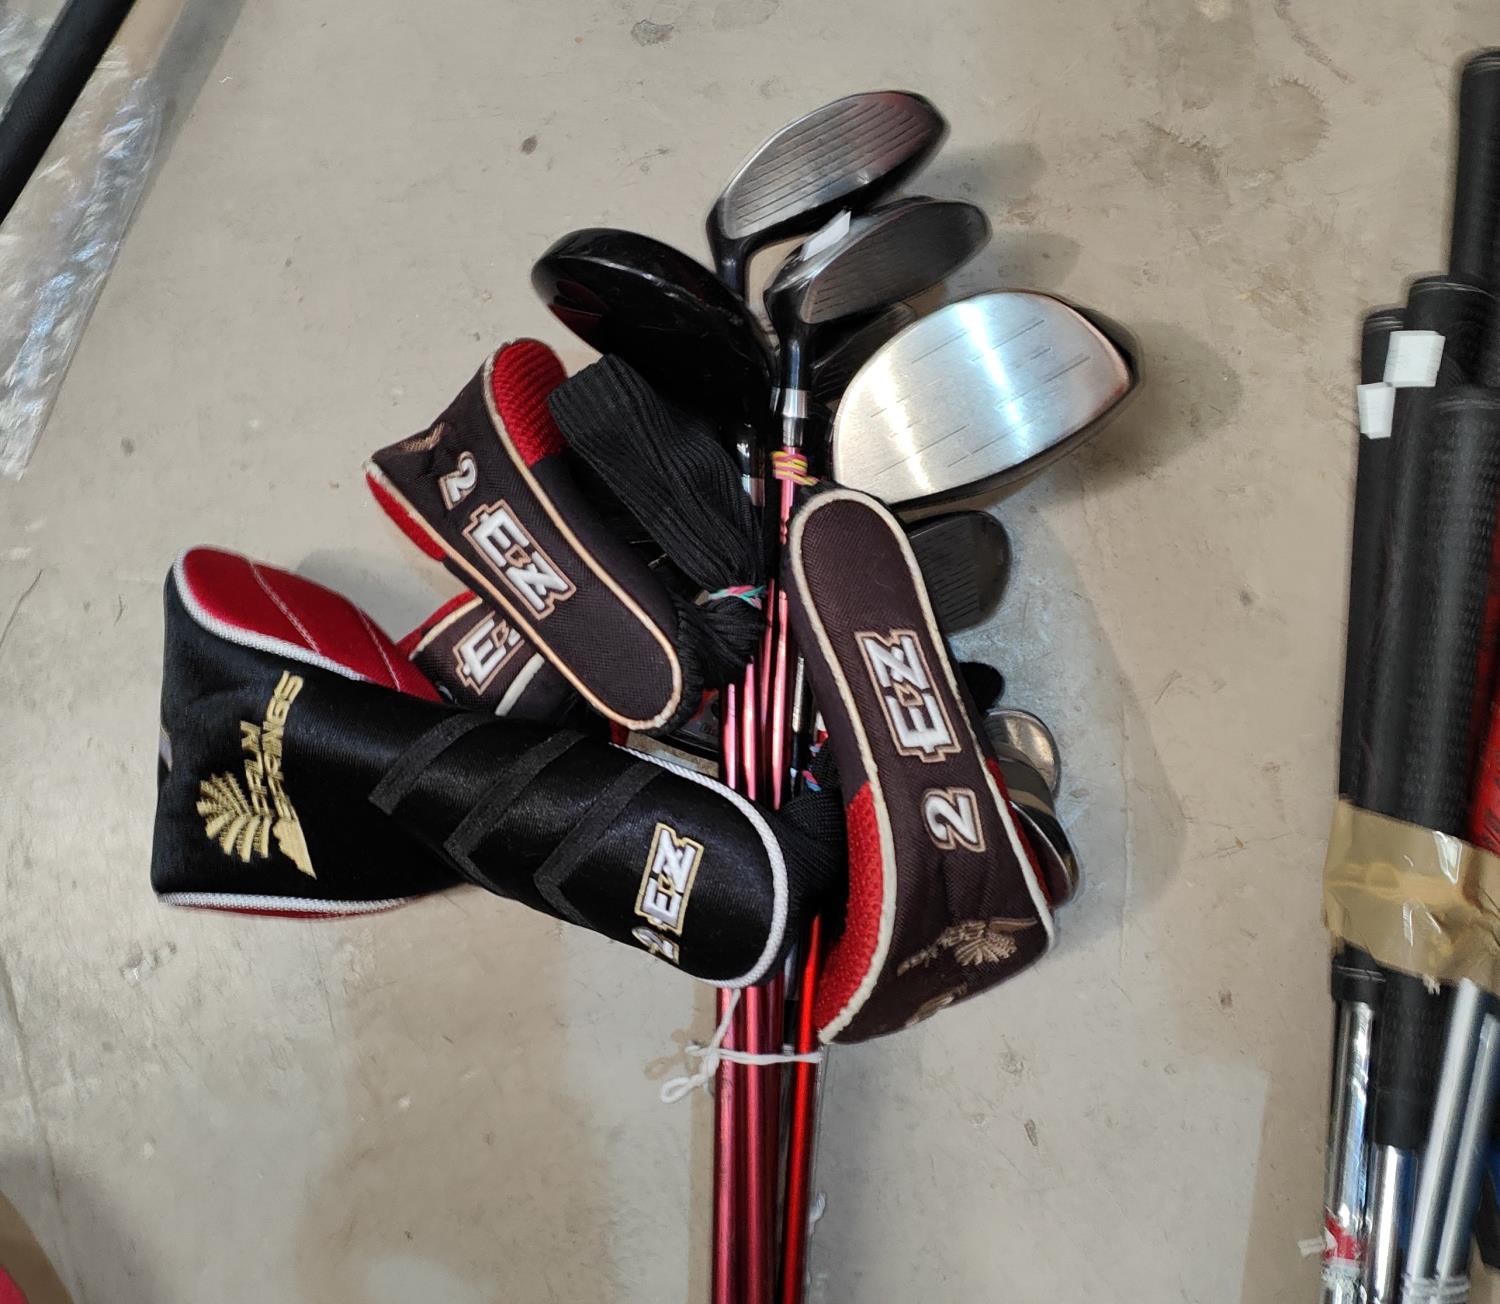 7 modern "King Cobra" golf clubs, 10 "Palm Springs" and other gold clubs.